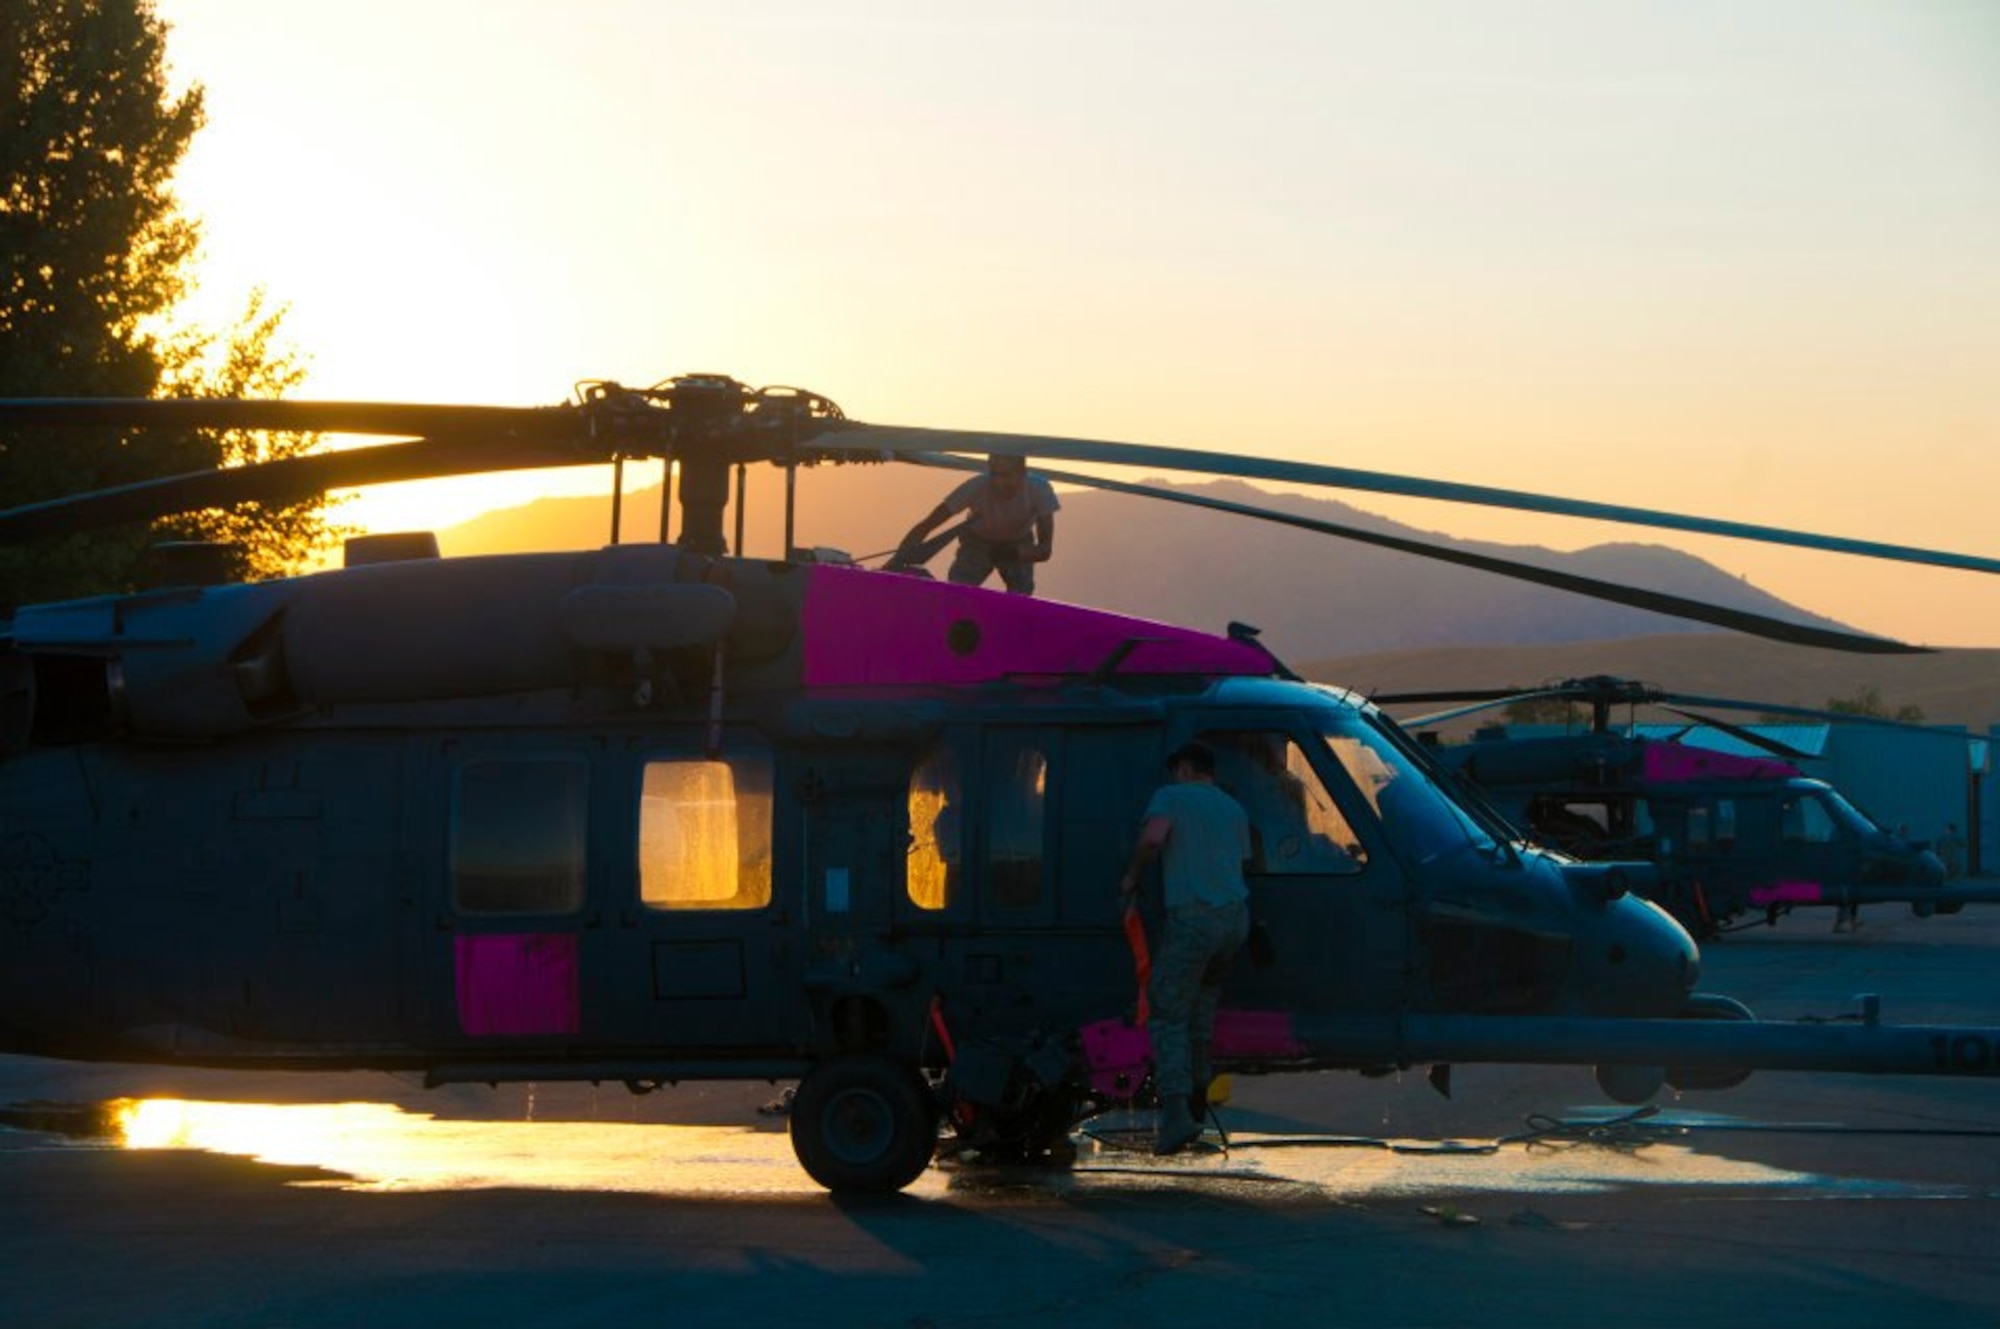 Two HH-60G Pave Hawk helicopters from the 129th Rescue Wing are battling the Jawbone Complex Fire in Kern County, Calif. The aircraft have been based out of the Tehachapi Municipal Airport in Tehachapi, Calif. since Sunday, Aug. 12. (Air National Guard photo/Master Sgt. Julie Avey)